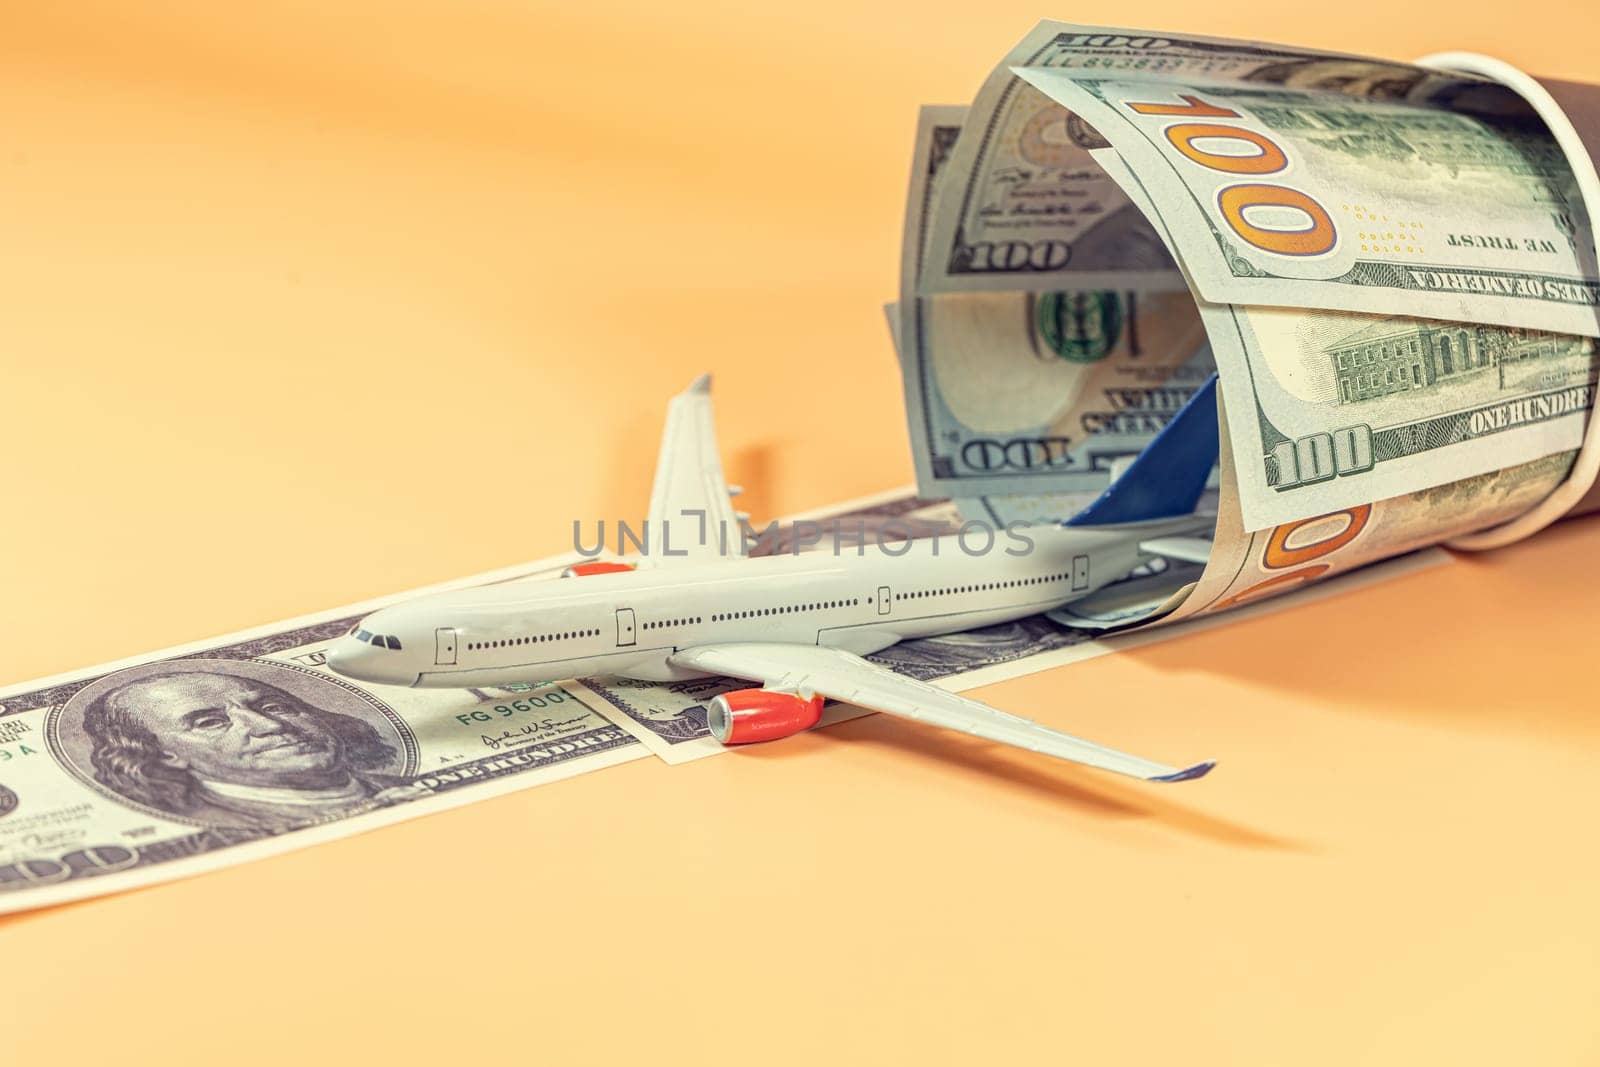 A toy airplane takes off on a runway of dollar bills